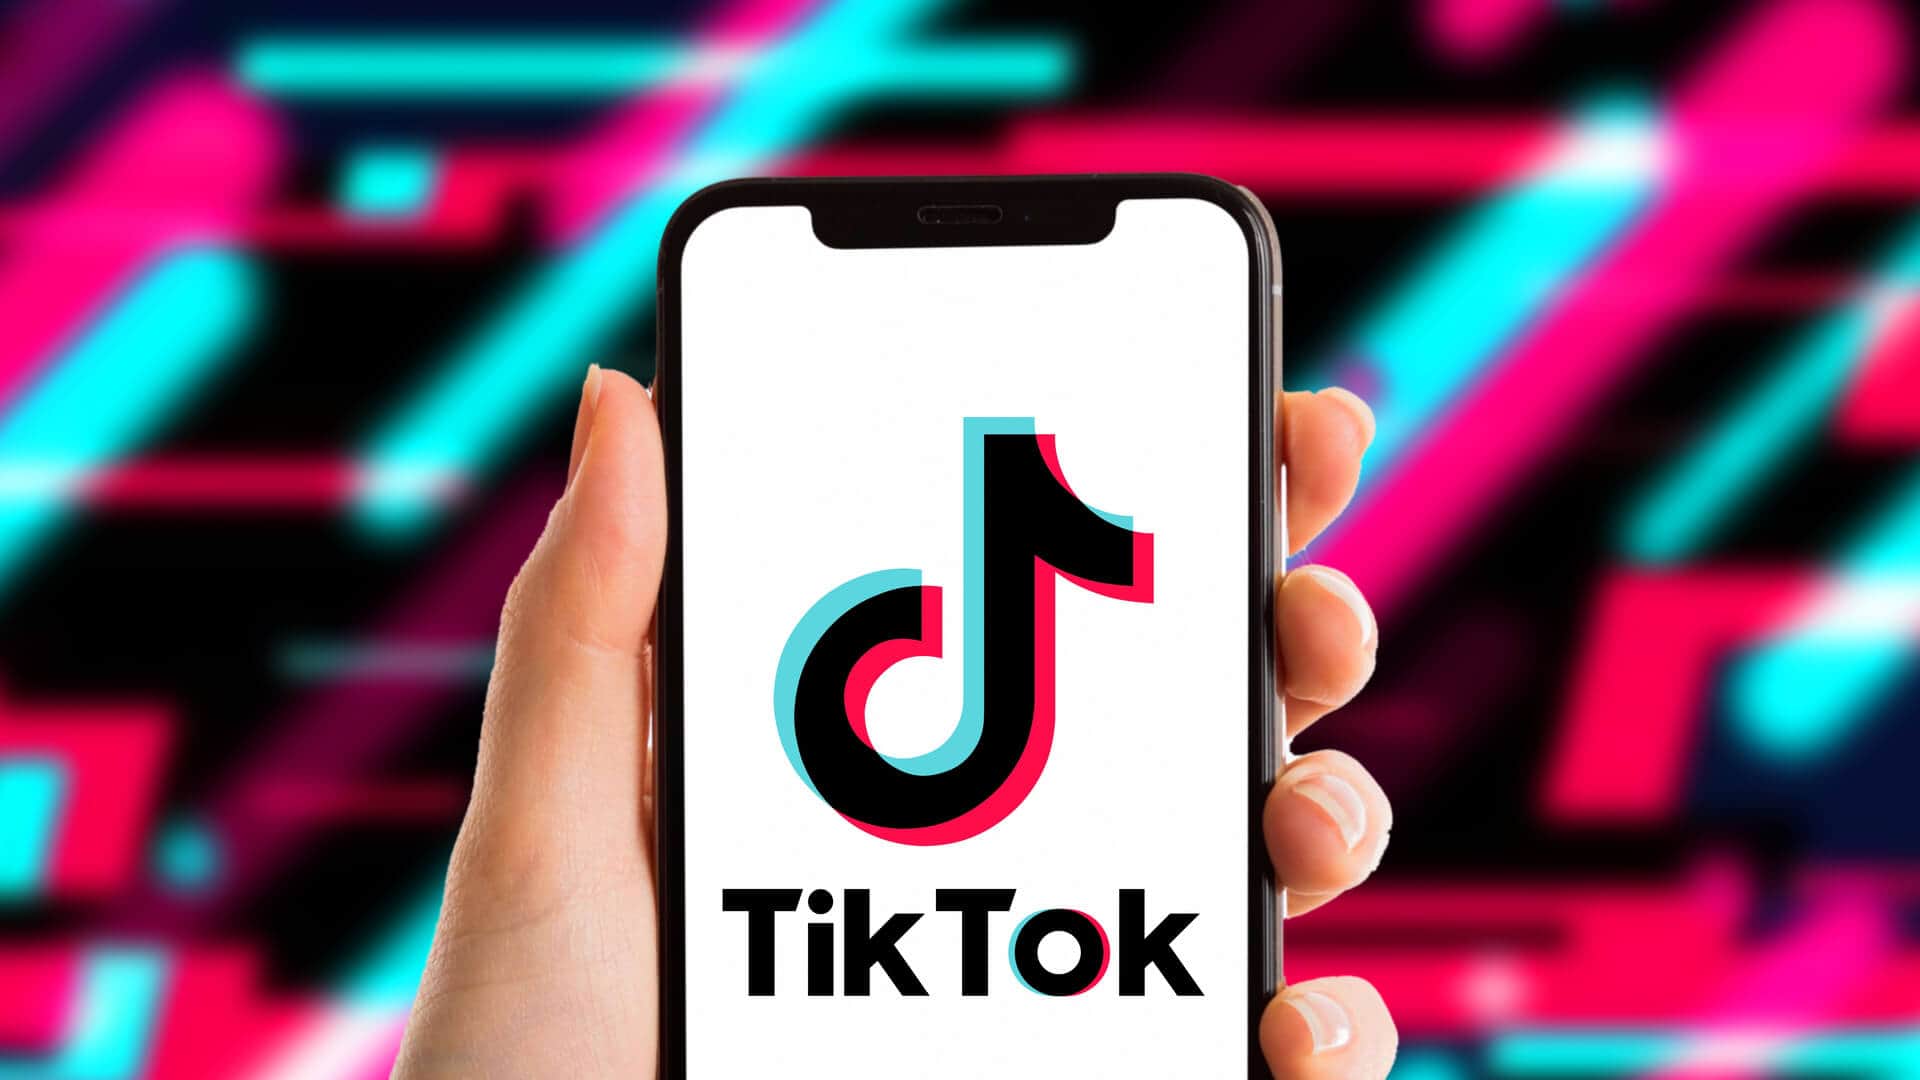 Download TikTok APK For Android Free Latest Version 2023